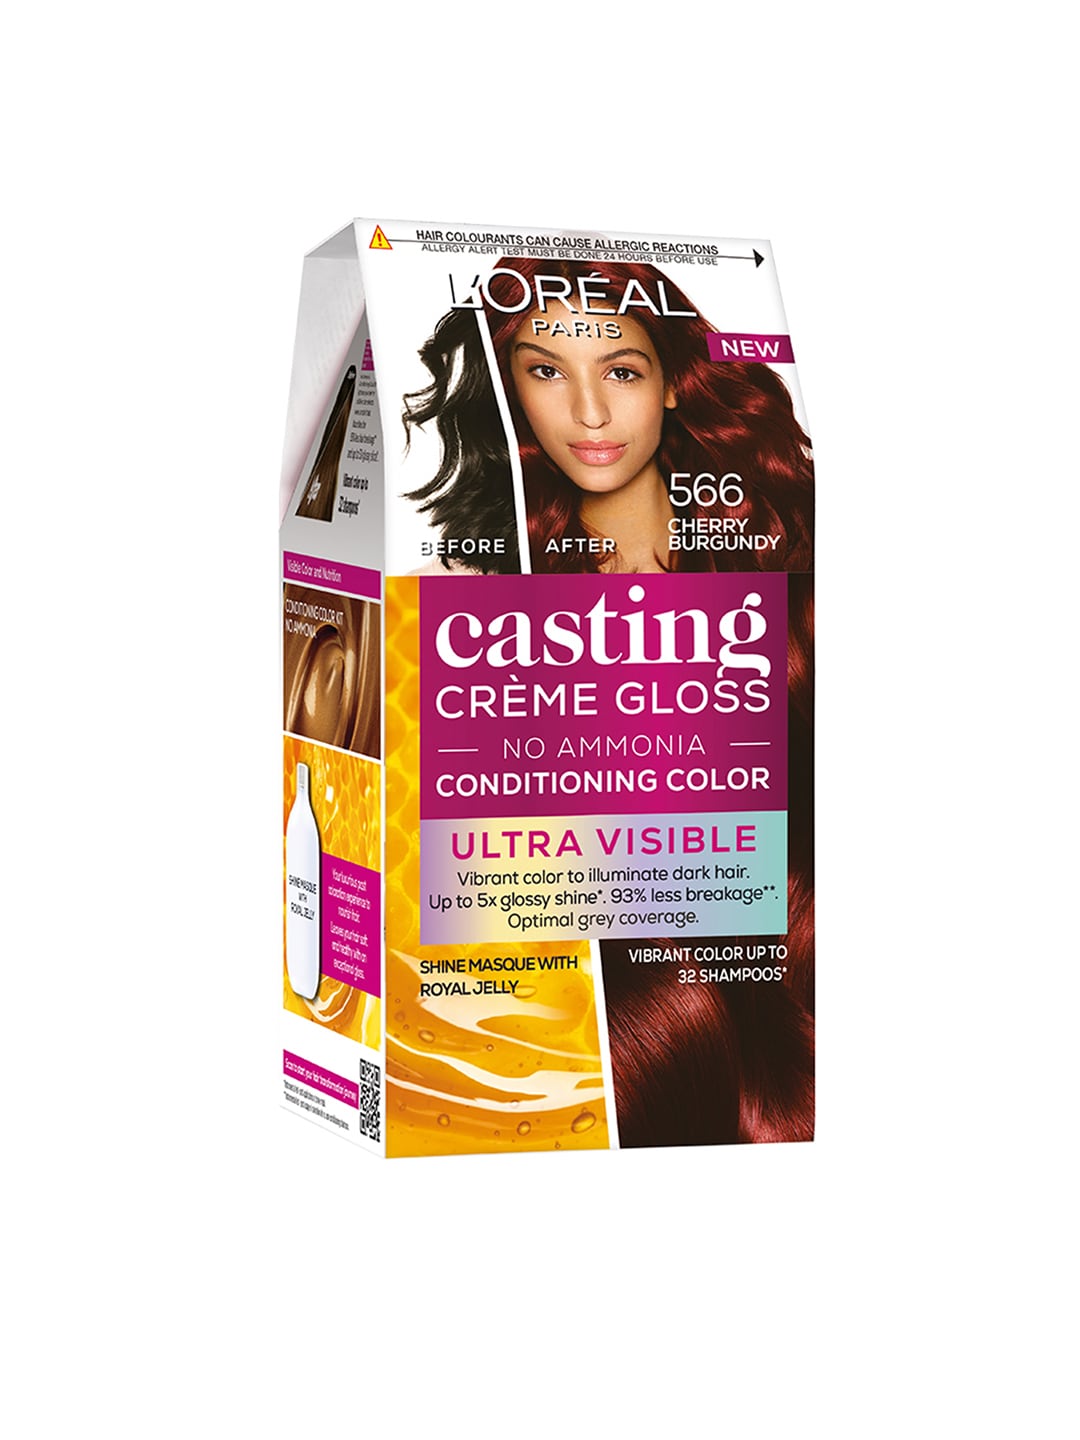 LOreal Paris Casting Creme Gloss Ultra Visible Hair Color - Cherry Burgundy 566 Price in India